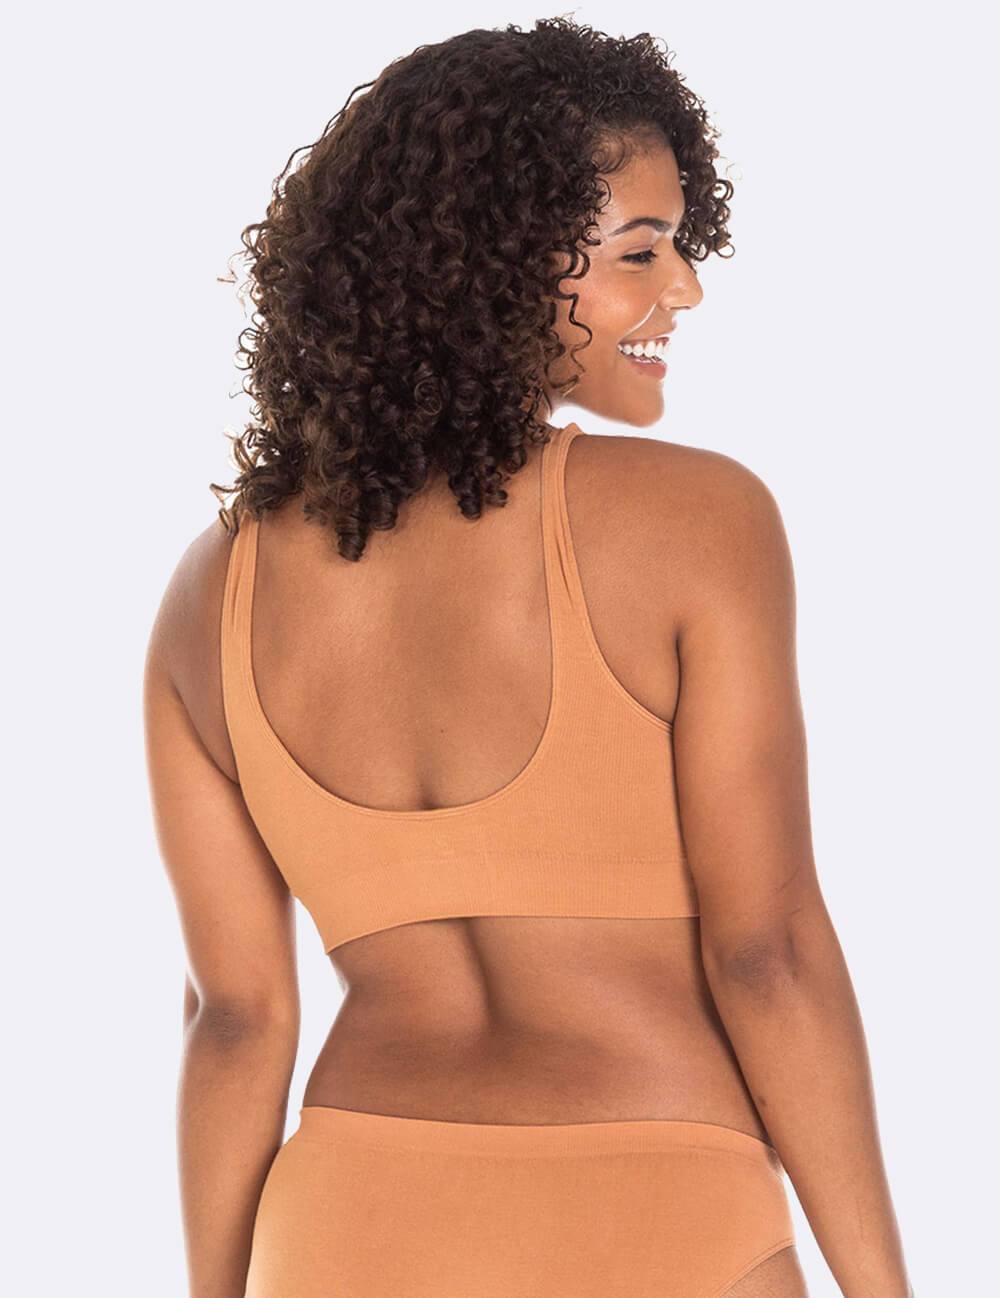 Padded Bamboo Shaper Bra from Boody Eco Wear - Herbs from the Labyrinth